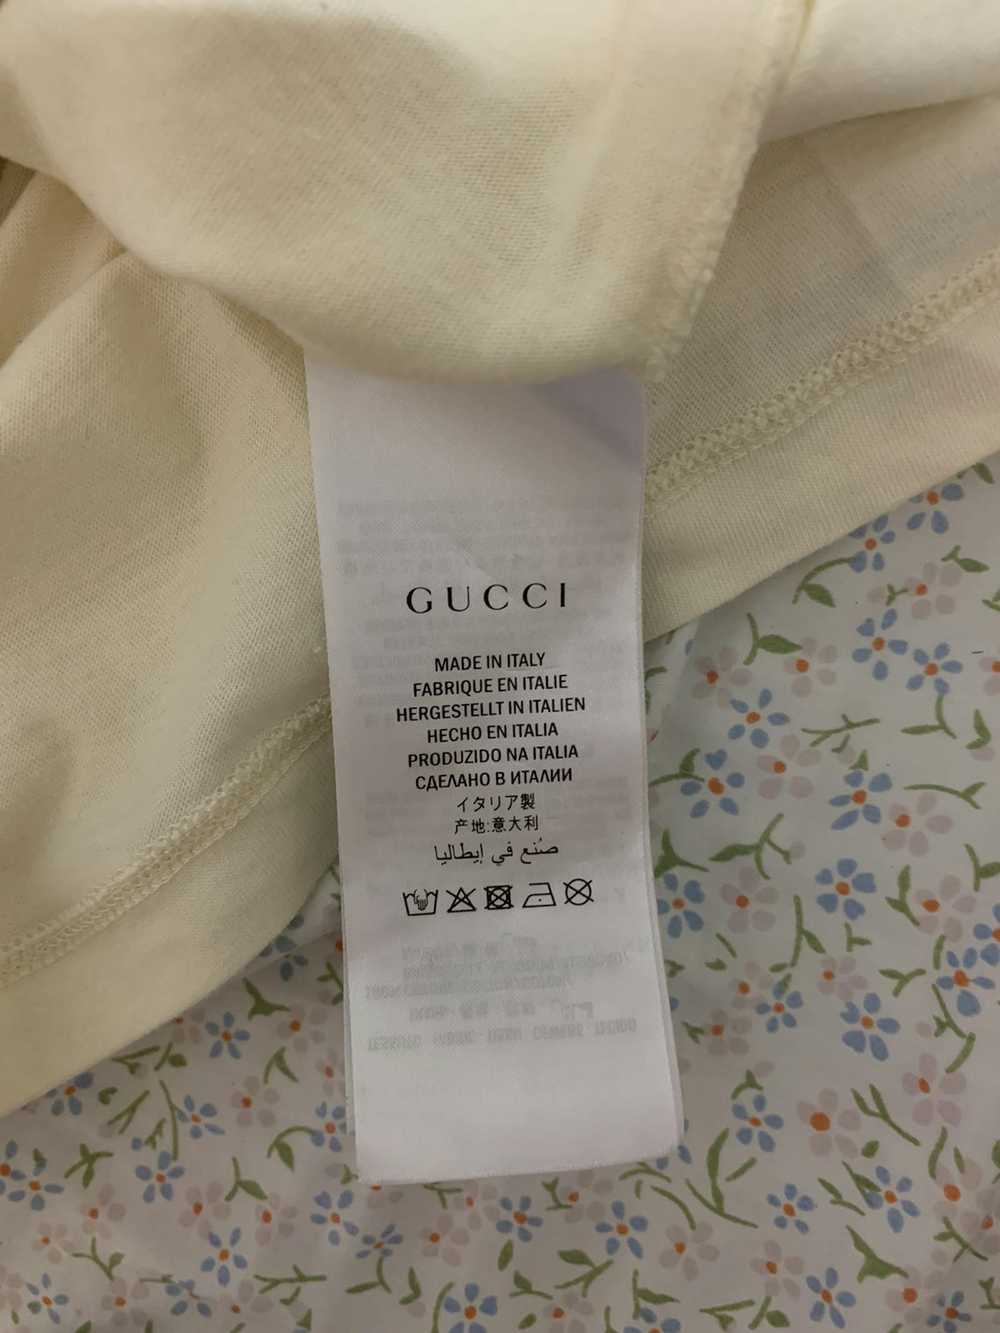 Gucci Gucci T-Shirt Rainbow Cities White - image 5